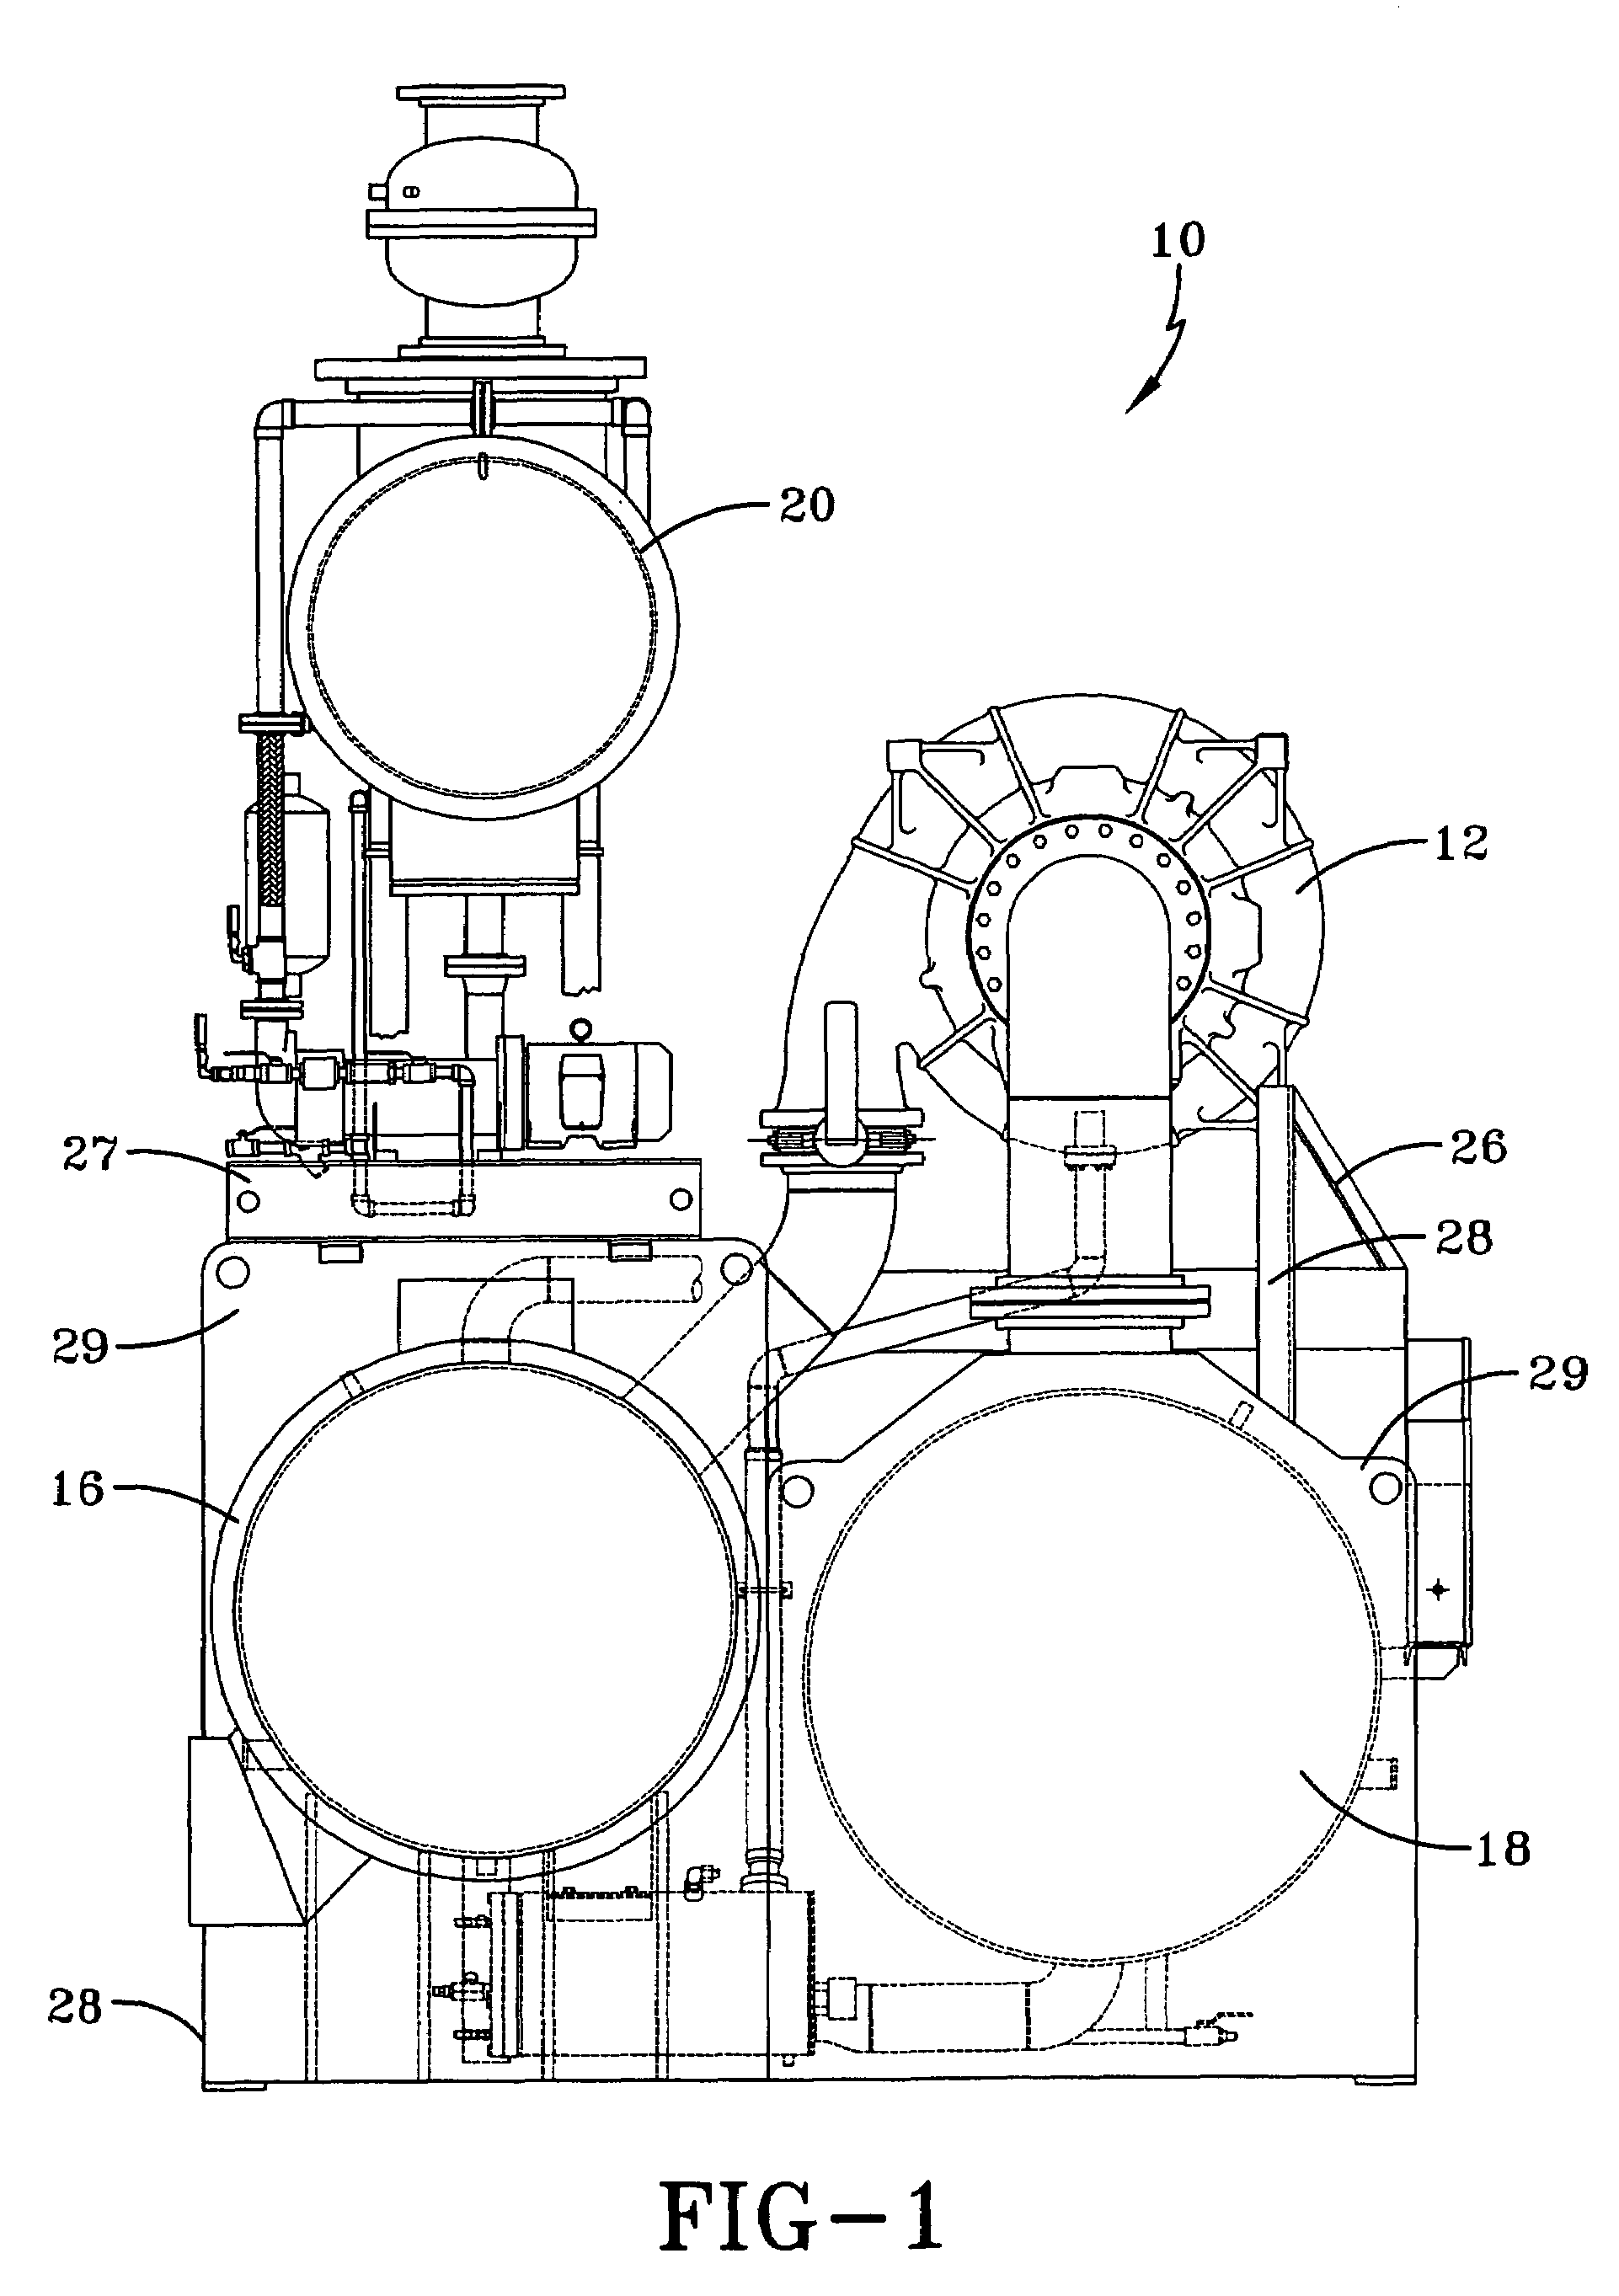 Integrated adaptive capacity control for a steam turbine powered chiller unit